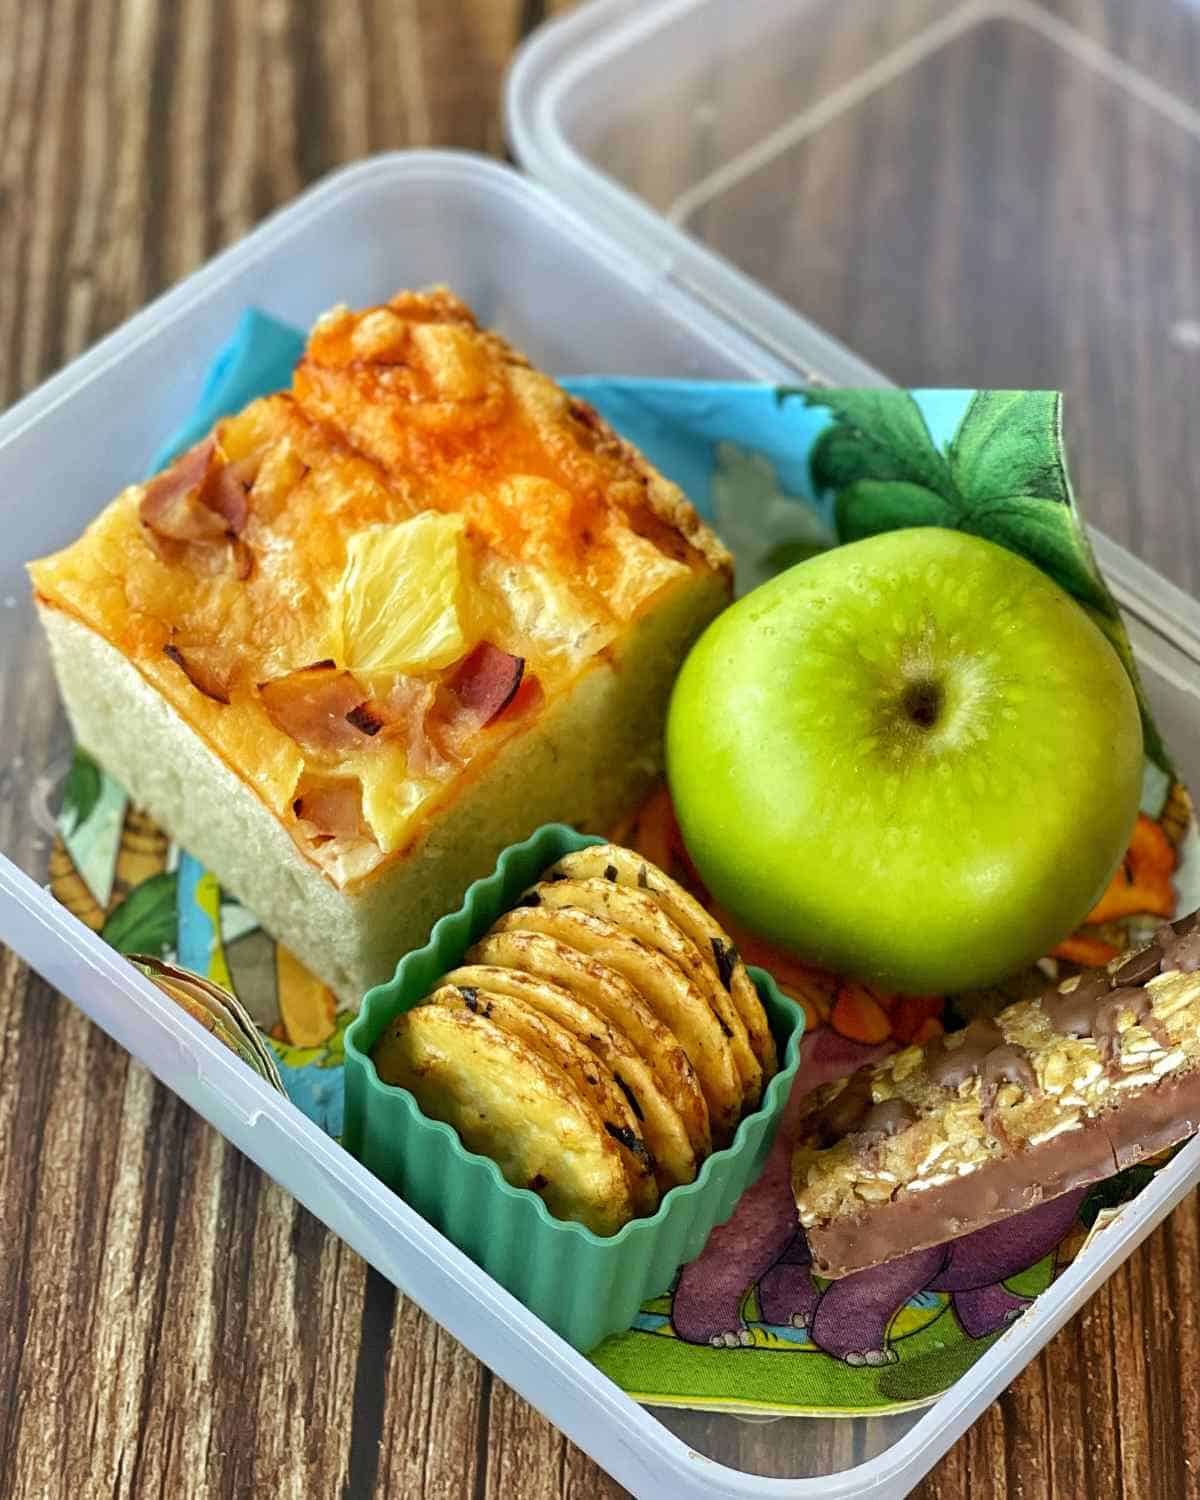 A slice of pizza bread in a lunch box with an apple and some rice crackers.